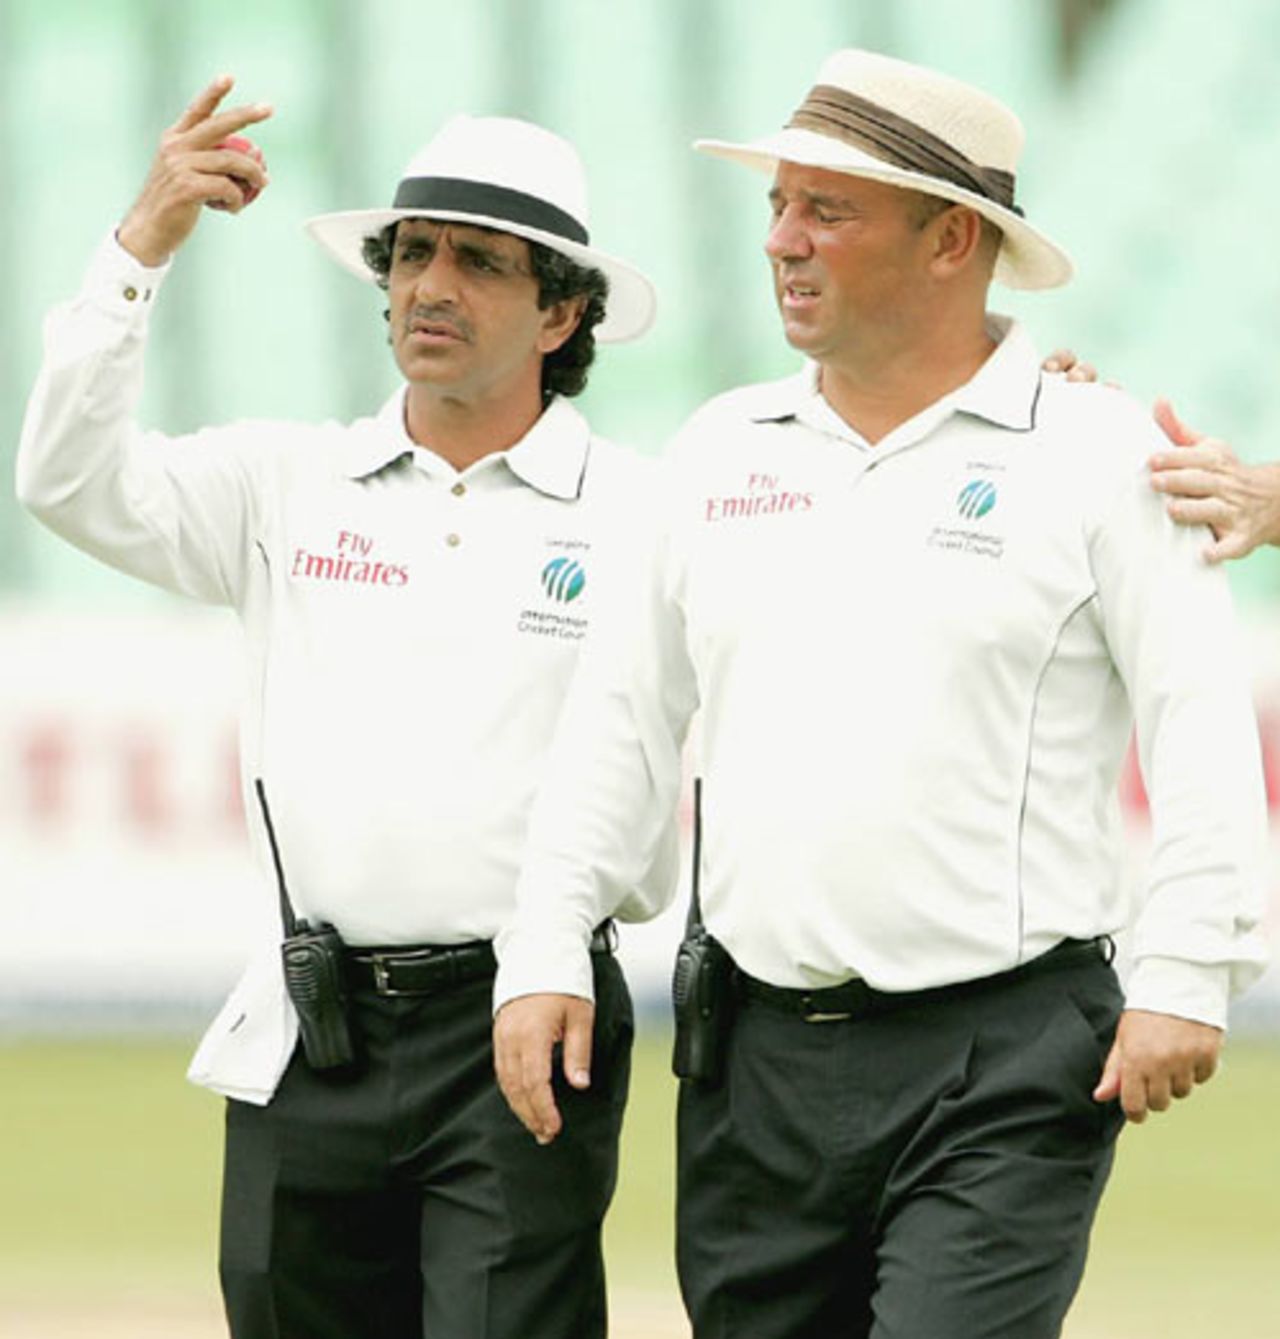 Asad Rauf helps Mark Benson off the field after he complained of heart palpitations, South Africa v India, 2nd Test, Durban, December 28, 2006 